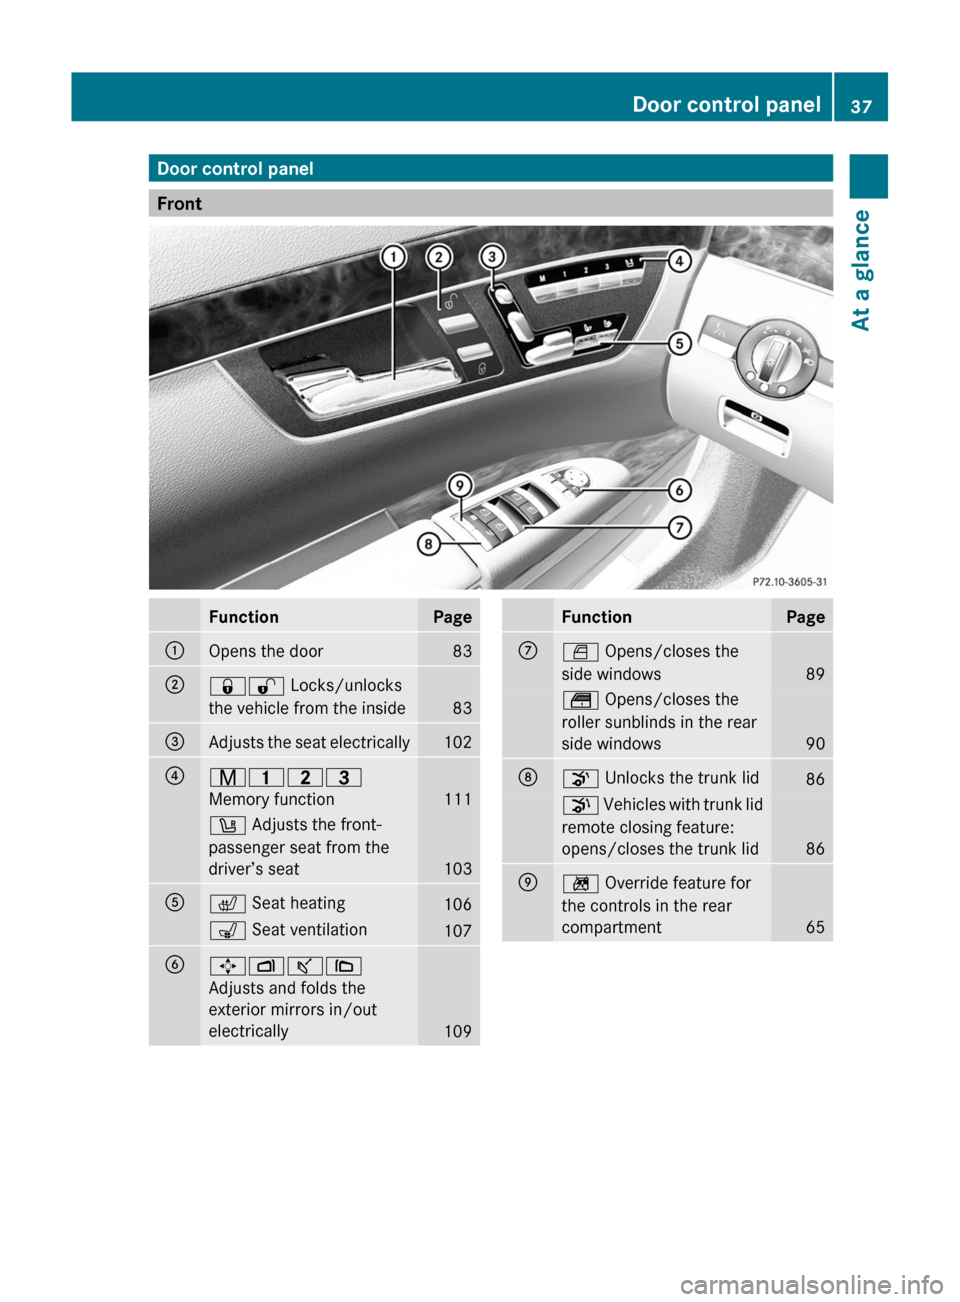 MERCEDES-BENZ S-Class 2011 W221 Owners Manual Door control panel
Front
FunctionPage:Opens the door83;&% Locks/unlocks
the vehicle from the inside
83
=Adjusts the seat electrically102?r 45=
Memory function
111
w  Adjusts the front-
passenger seat 